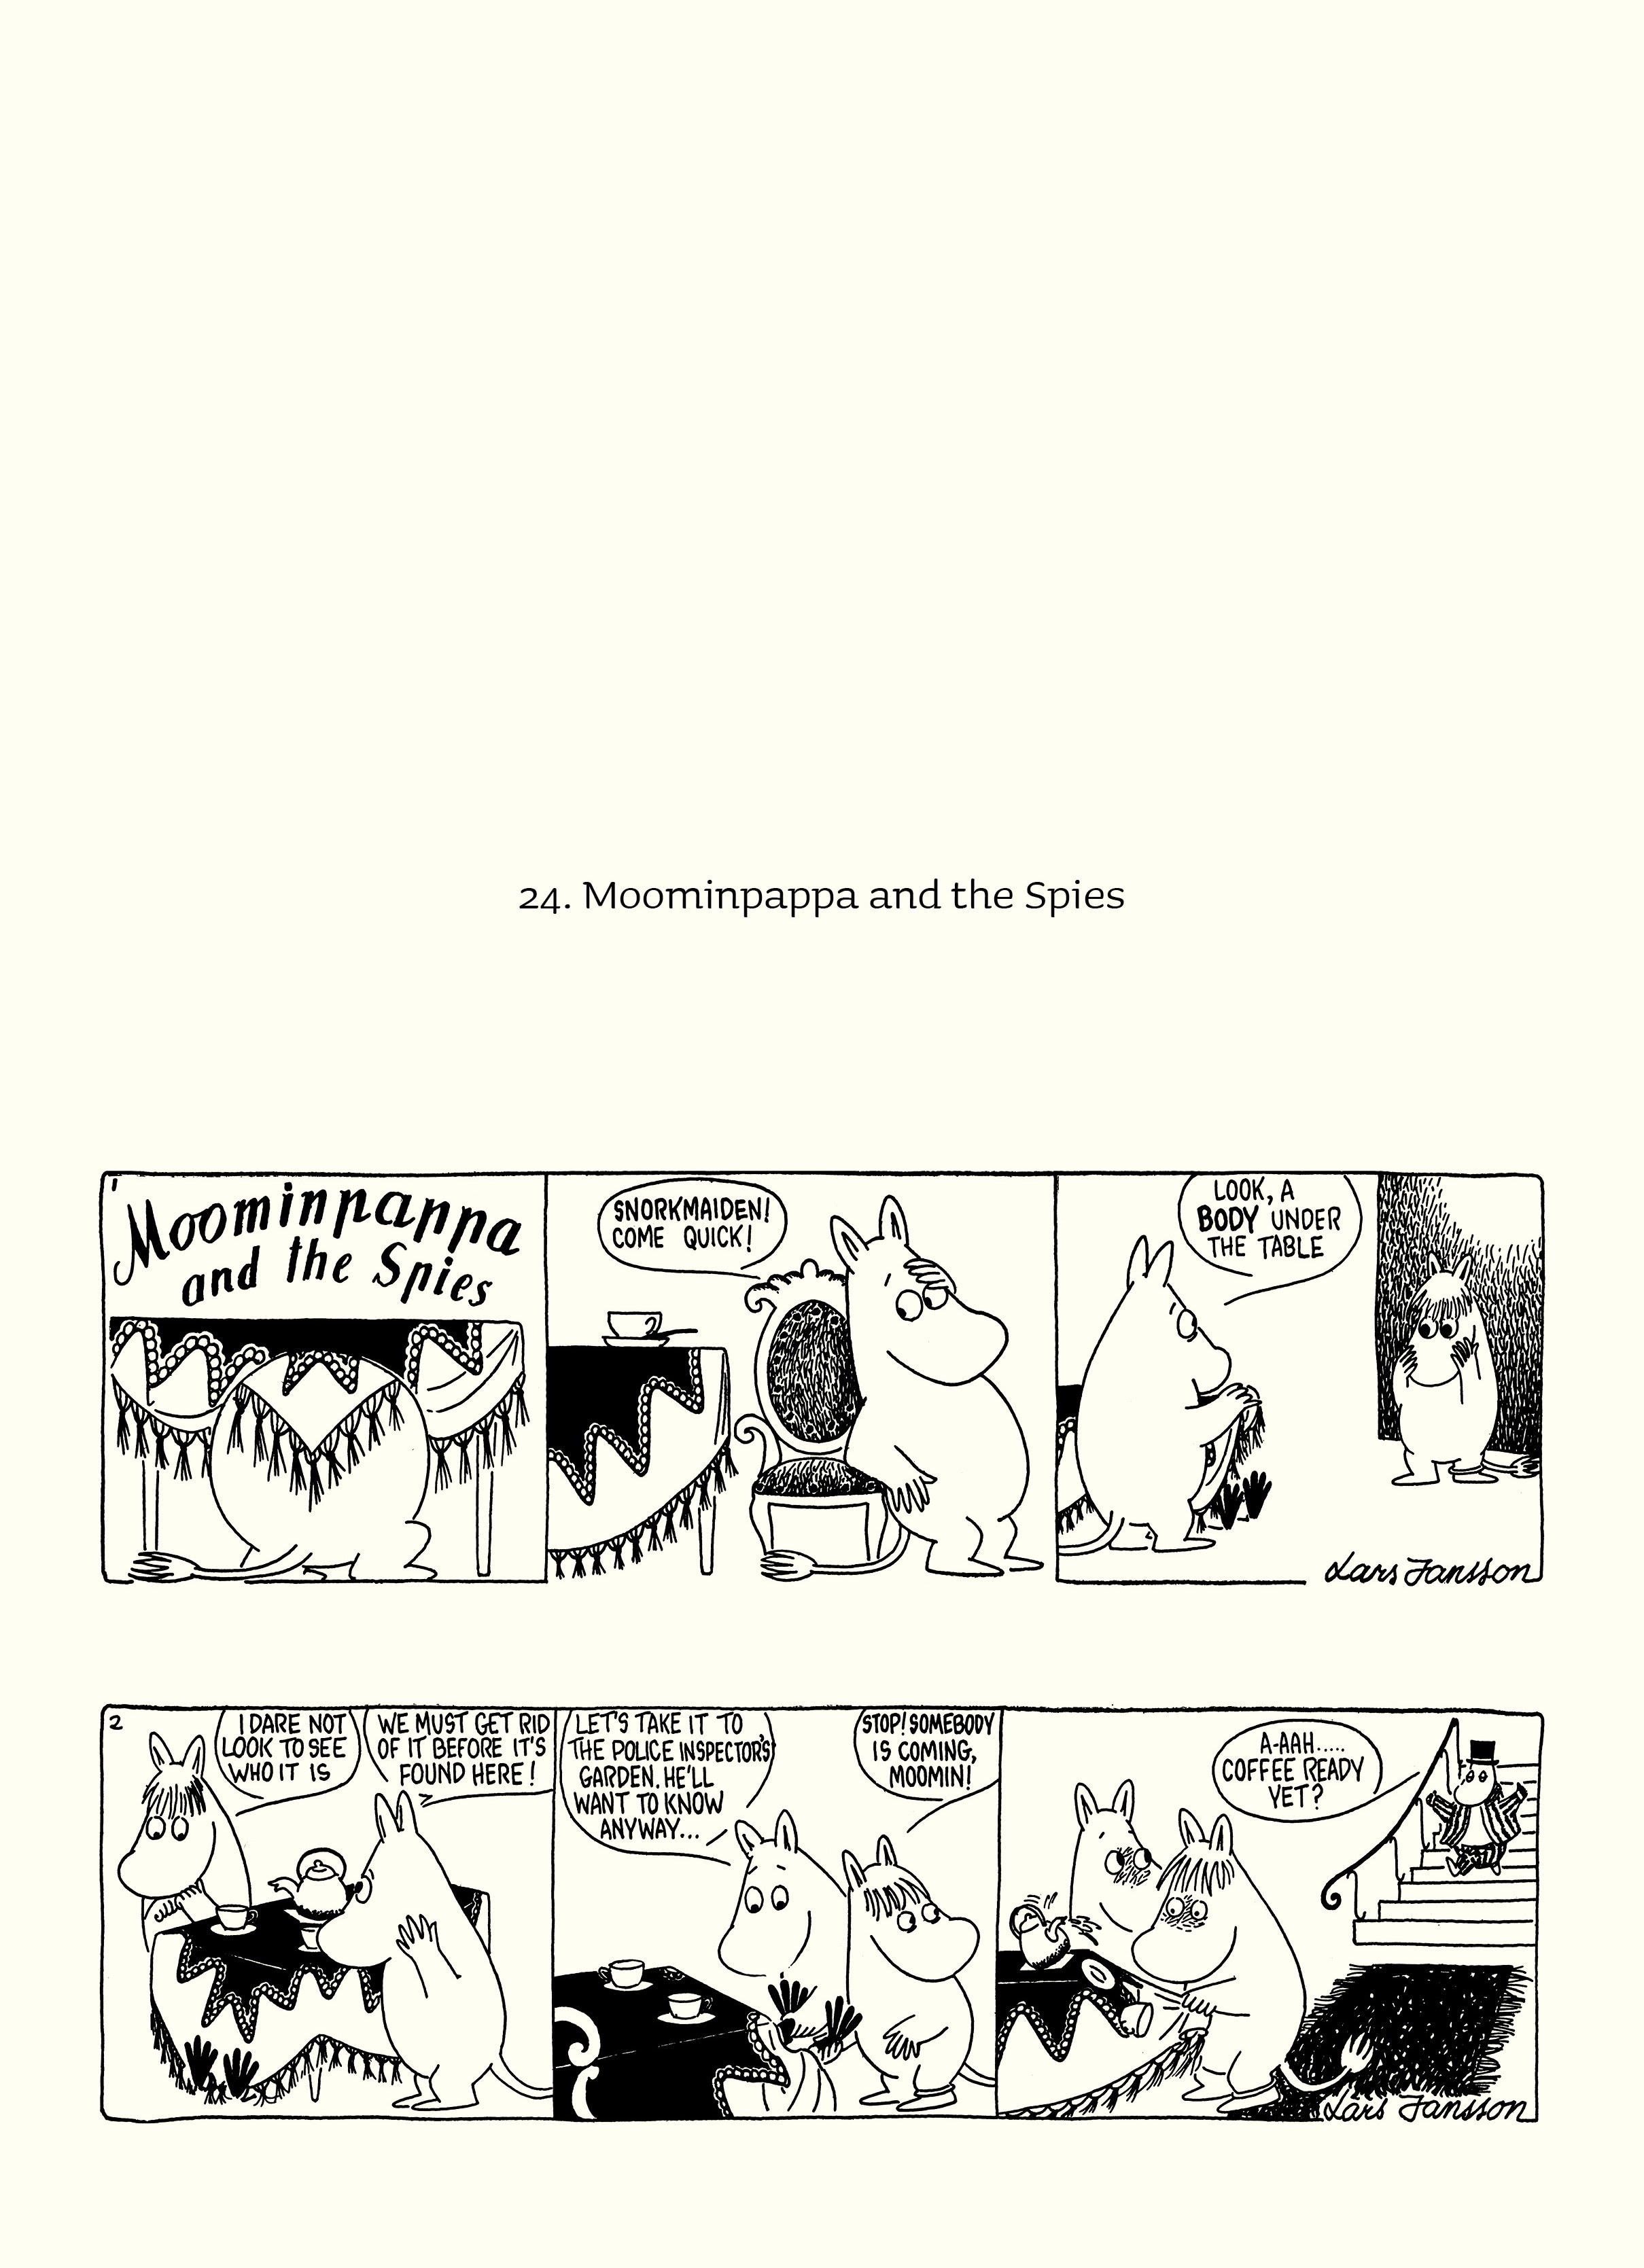 Read online Moomin: The Complete Lars Jansson Comic Strip comic -  Issue # TPB 6 - 47